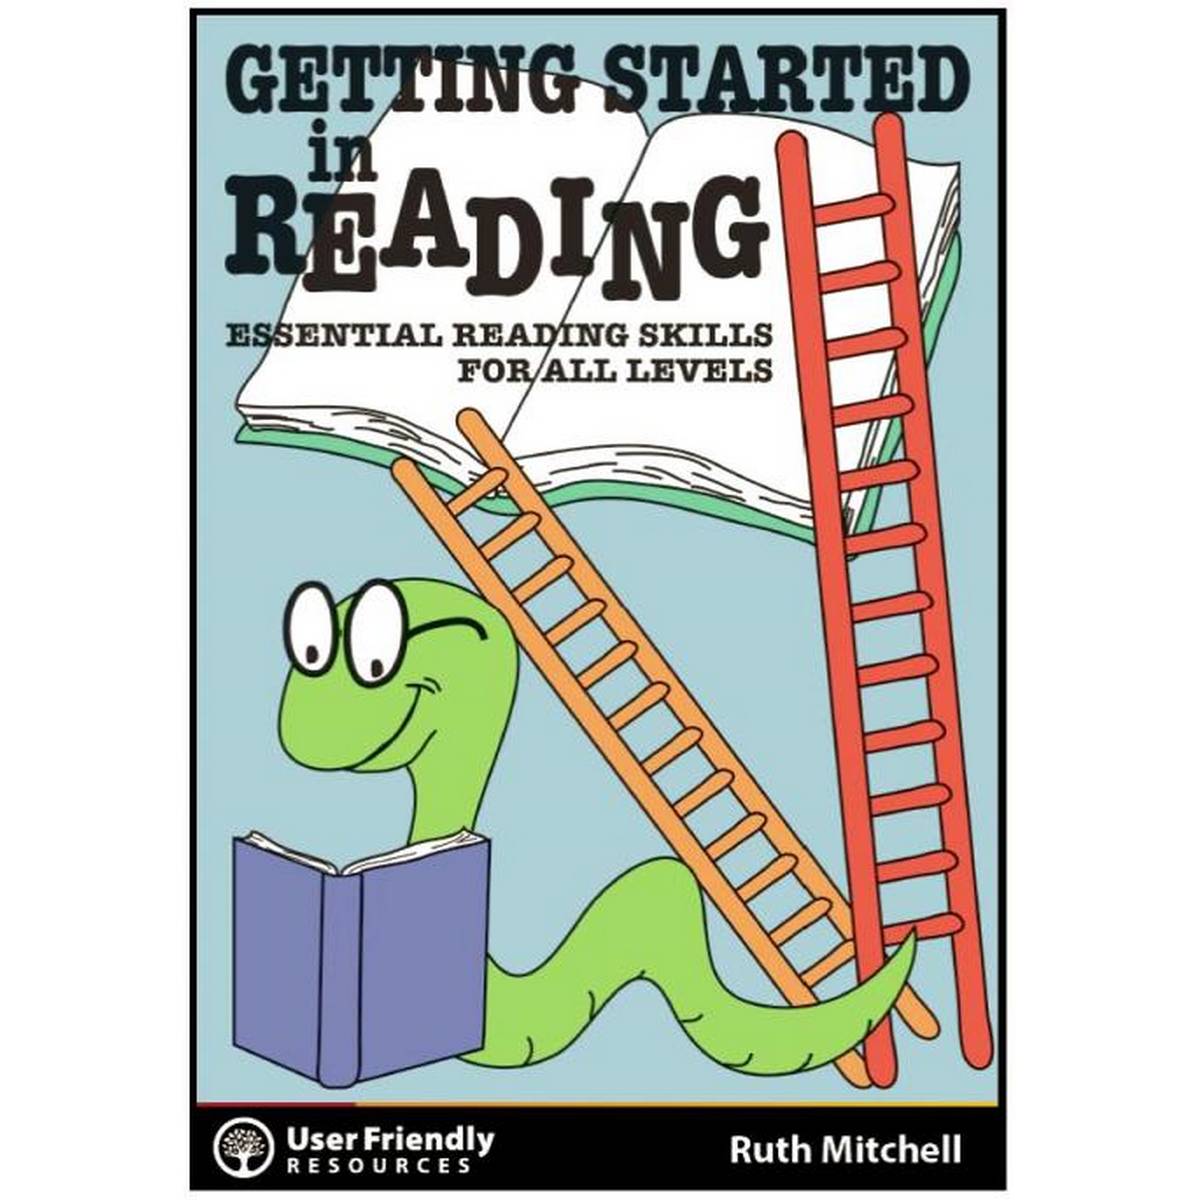 Getting Started in Reading: Essential Reading Skills for All Levels